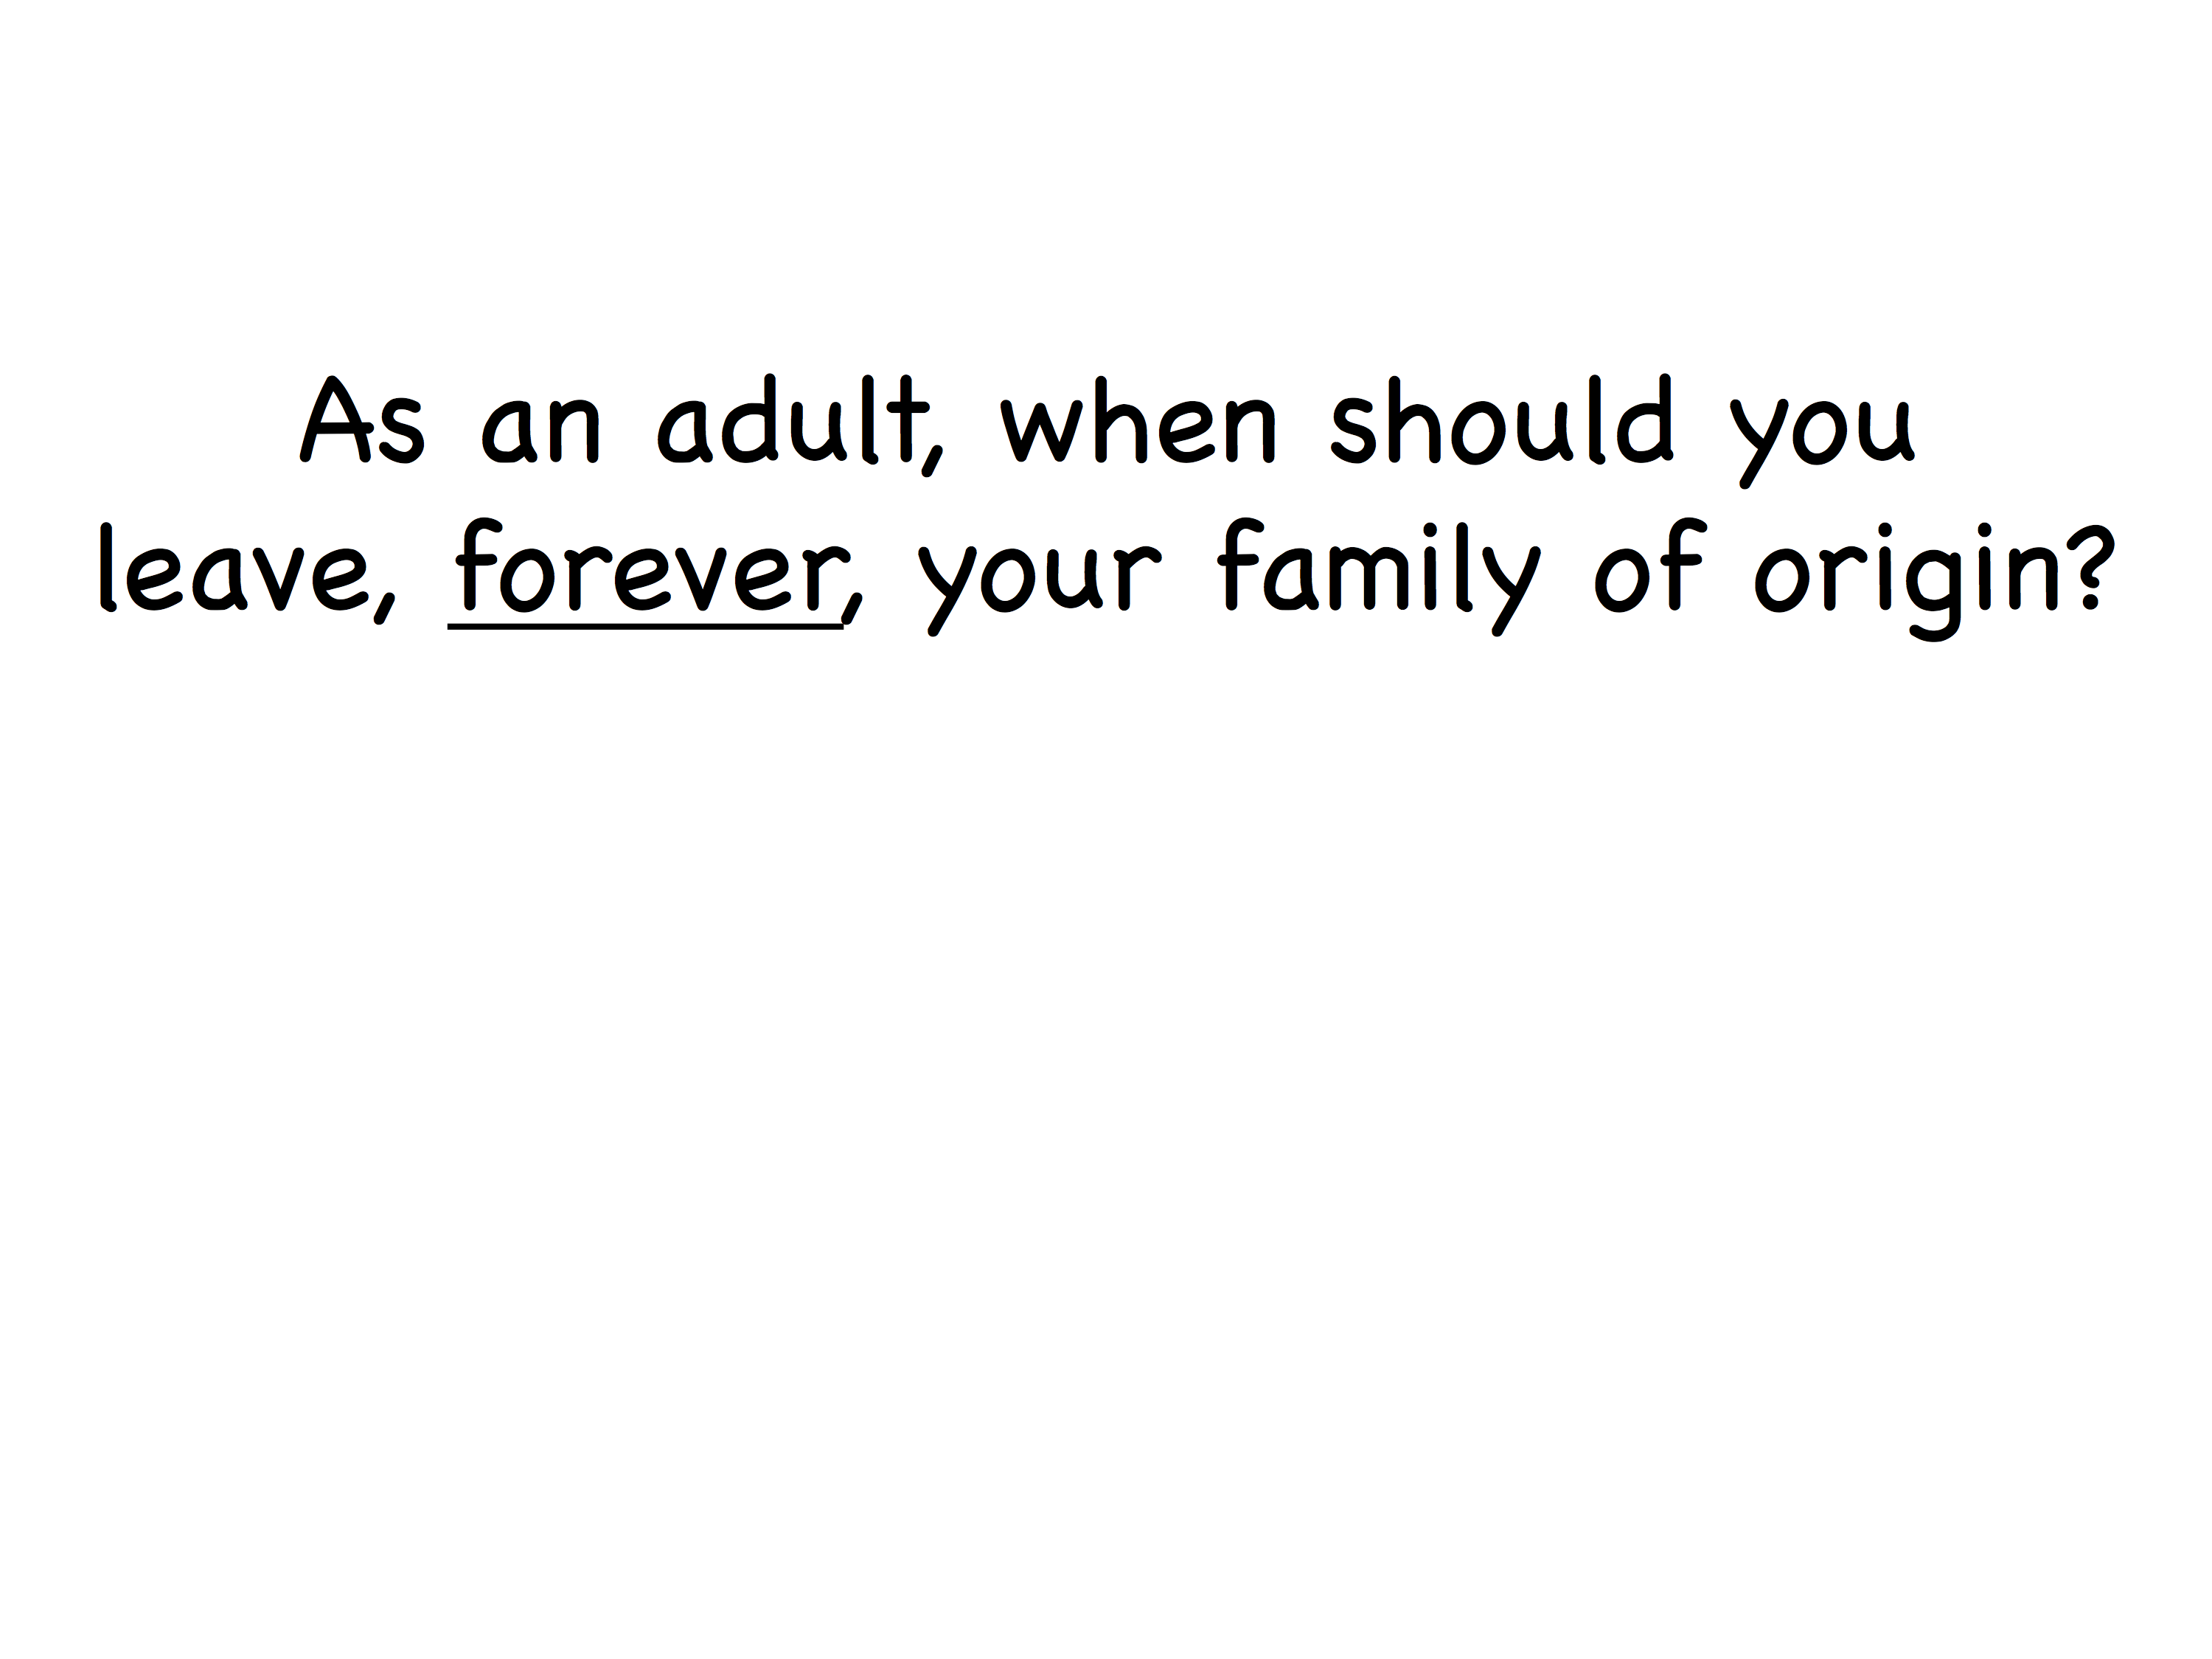 When should you leave your family of origin?